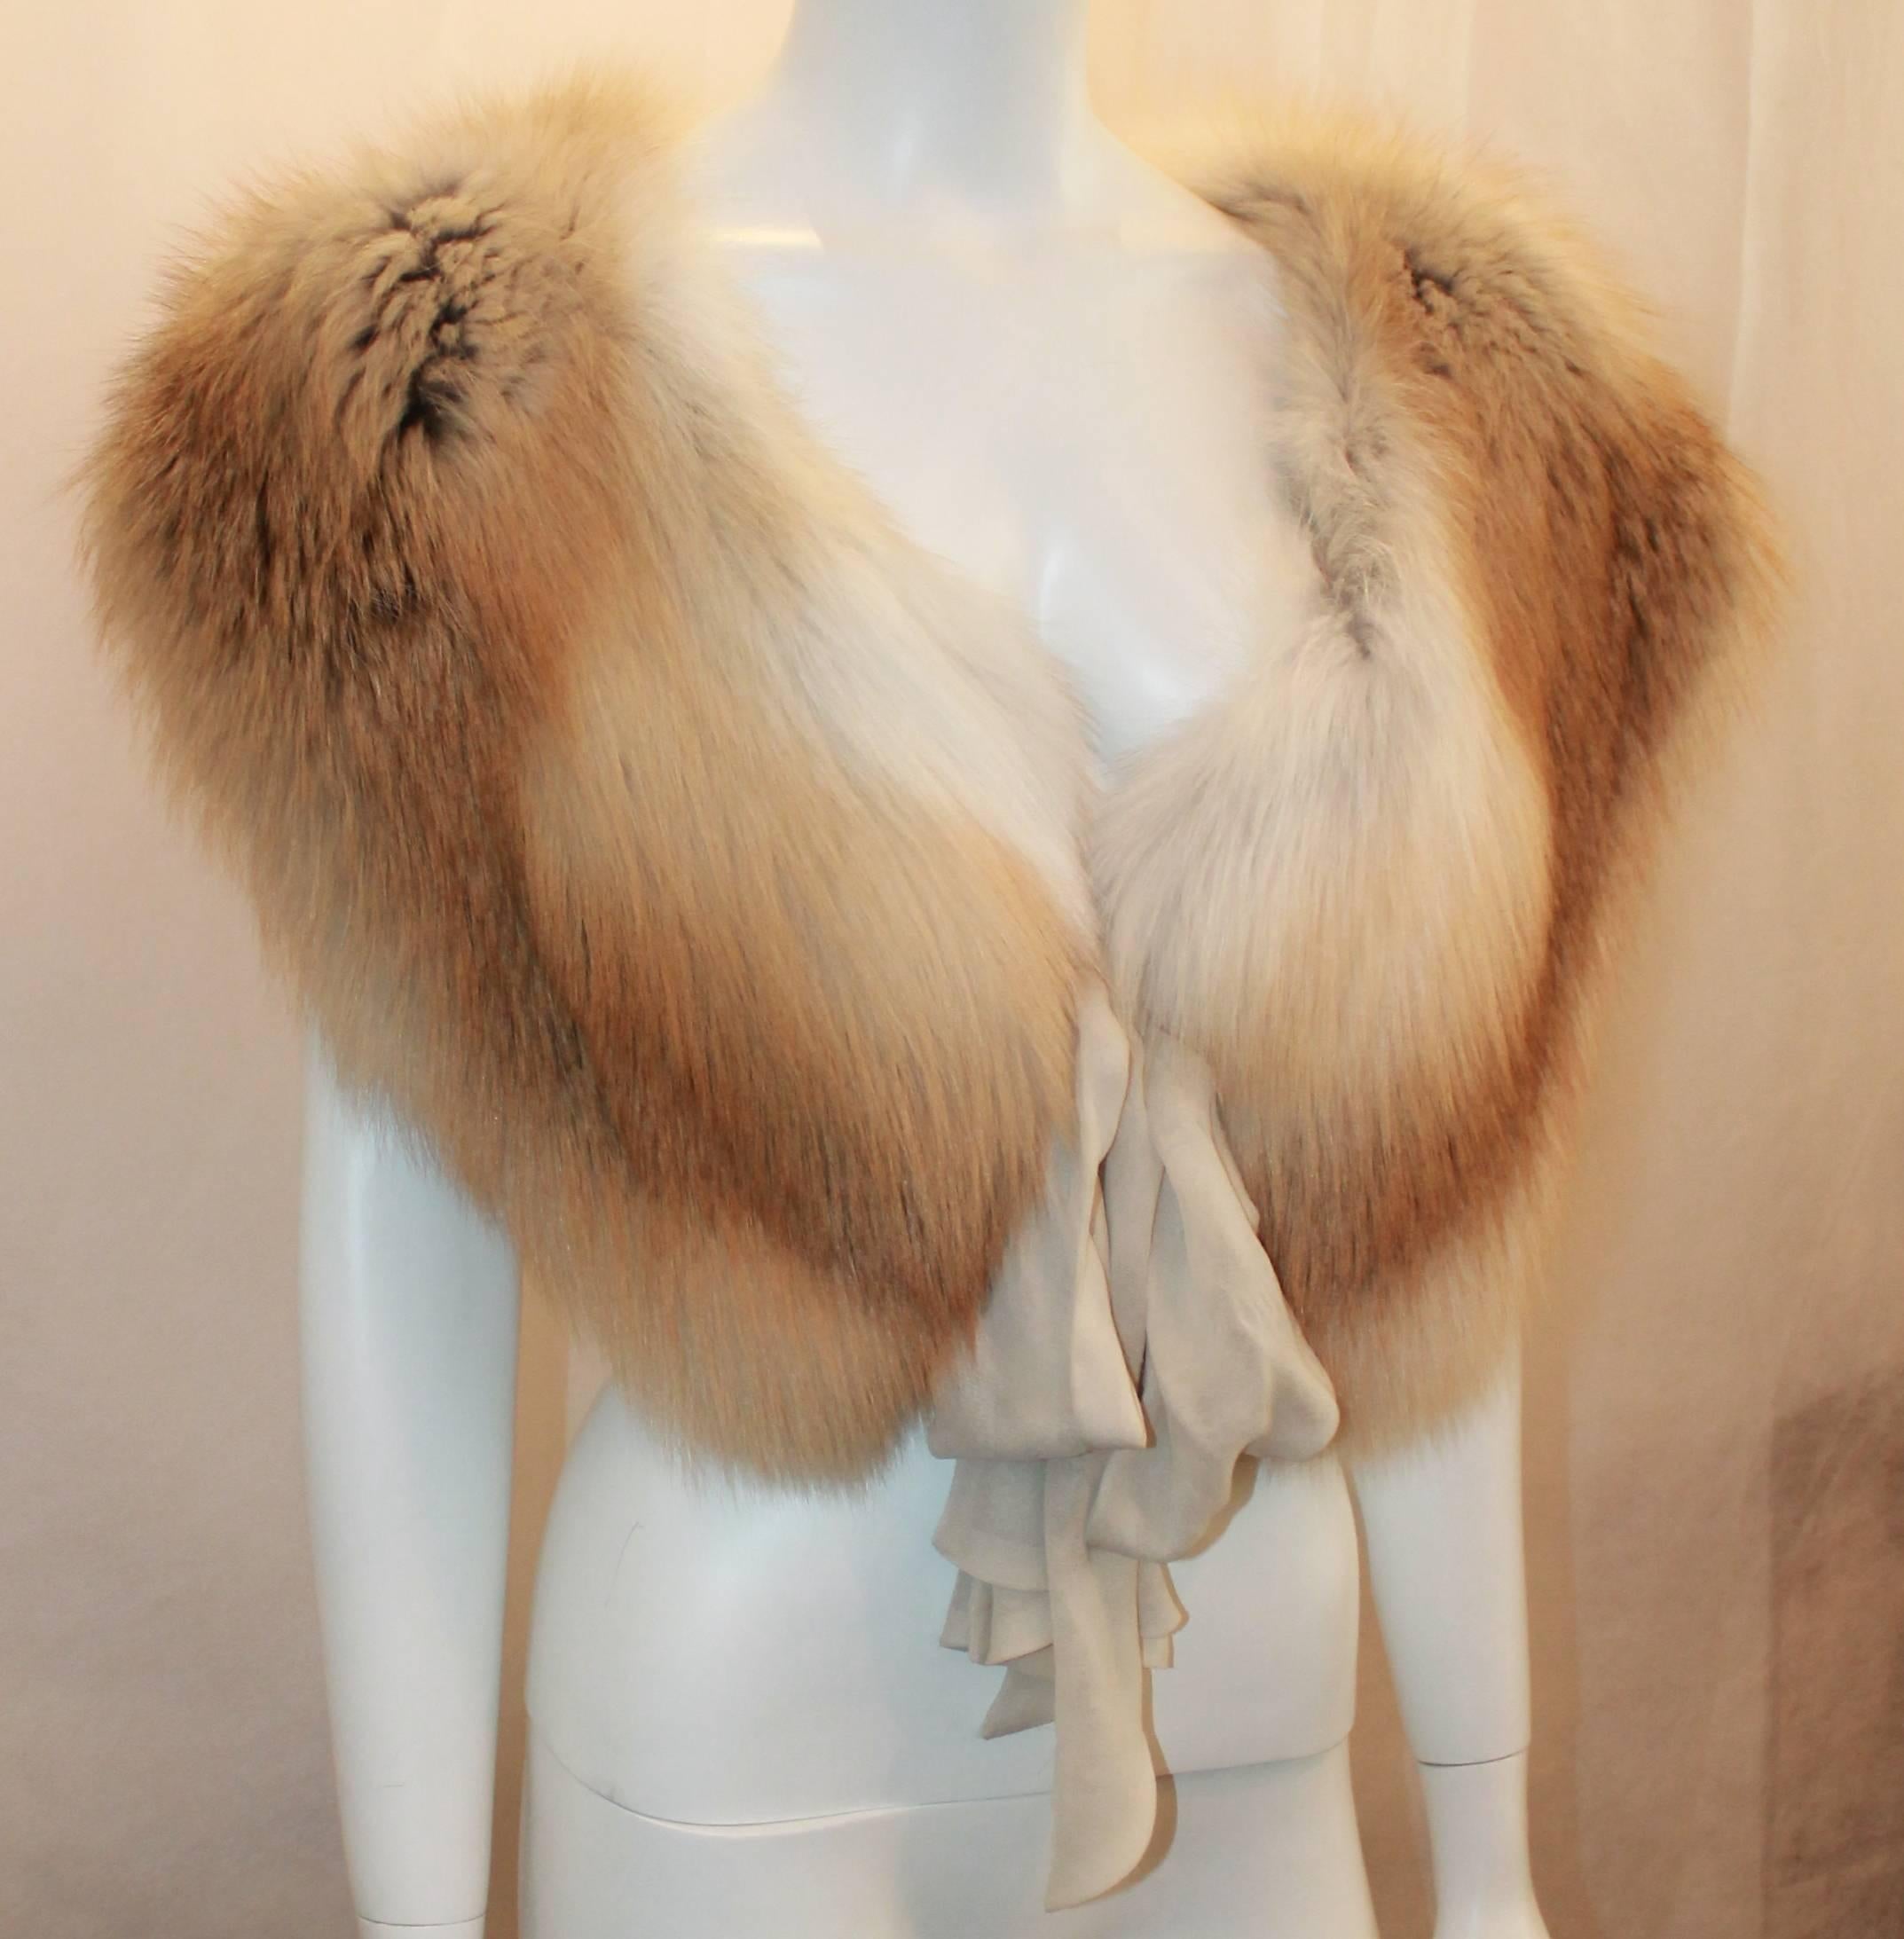 Oscar de la Renta Fox Fur Shoulder Wrap w/ Ribbon - Circa 2013.  This beautiful fur is in excellent condition.  It features a soft white fox fur with a more reddish coloring towards the middle and a light beige ribbon to